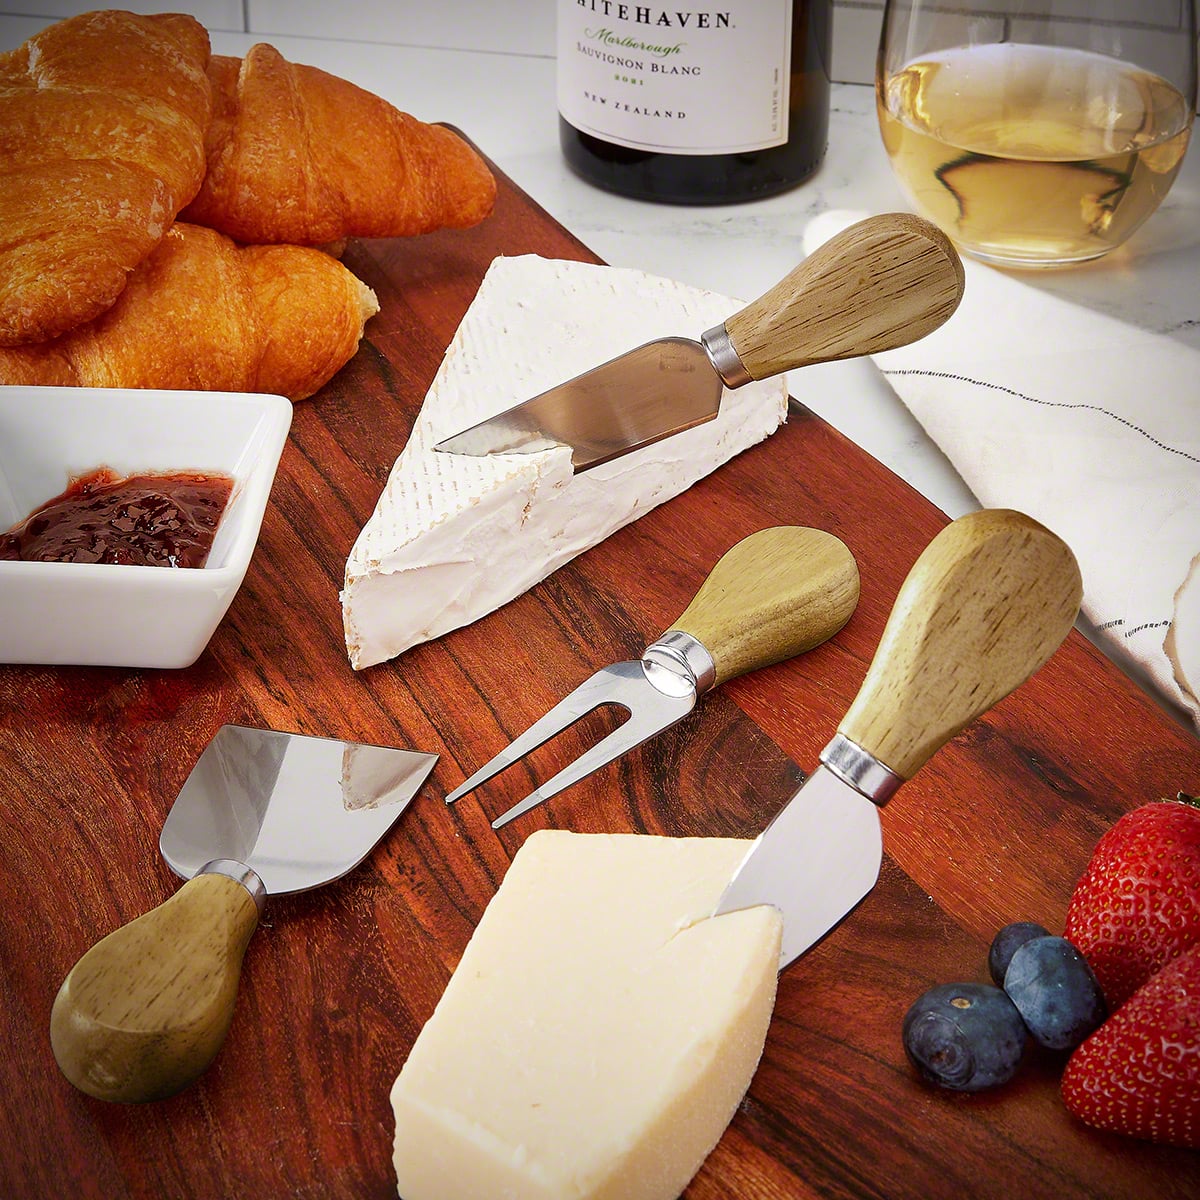 Trieste Large Personalized Cheese Board Set with Cheese Knives - Marble and Wood